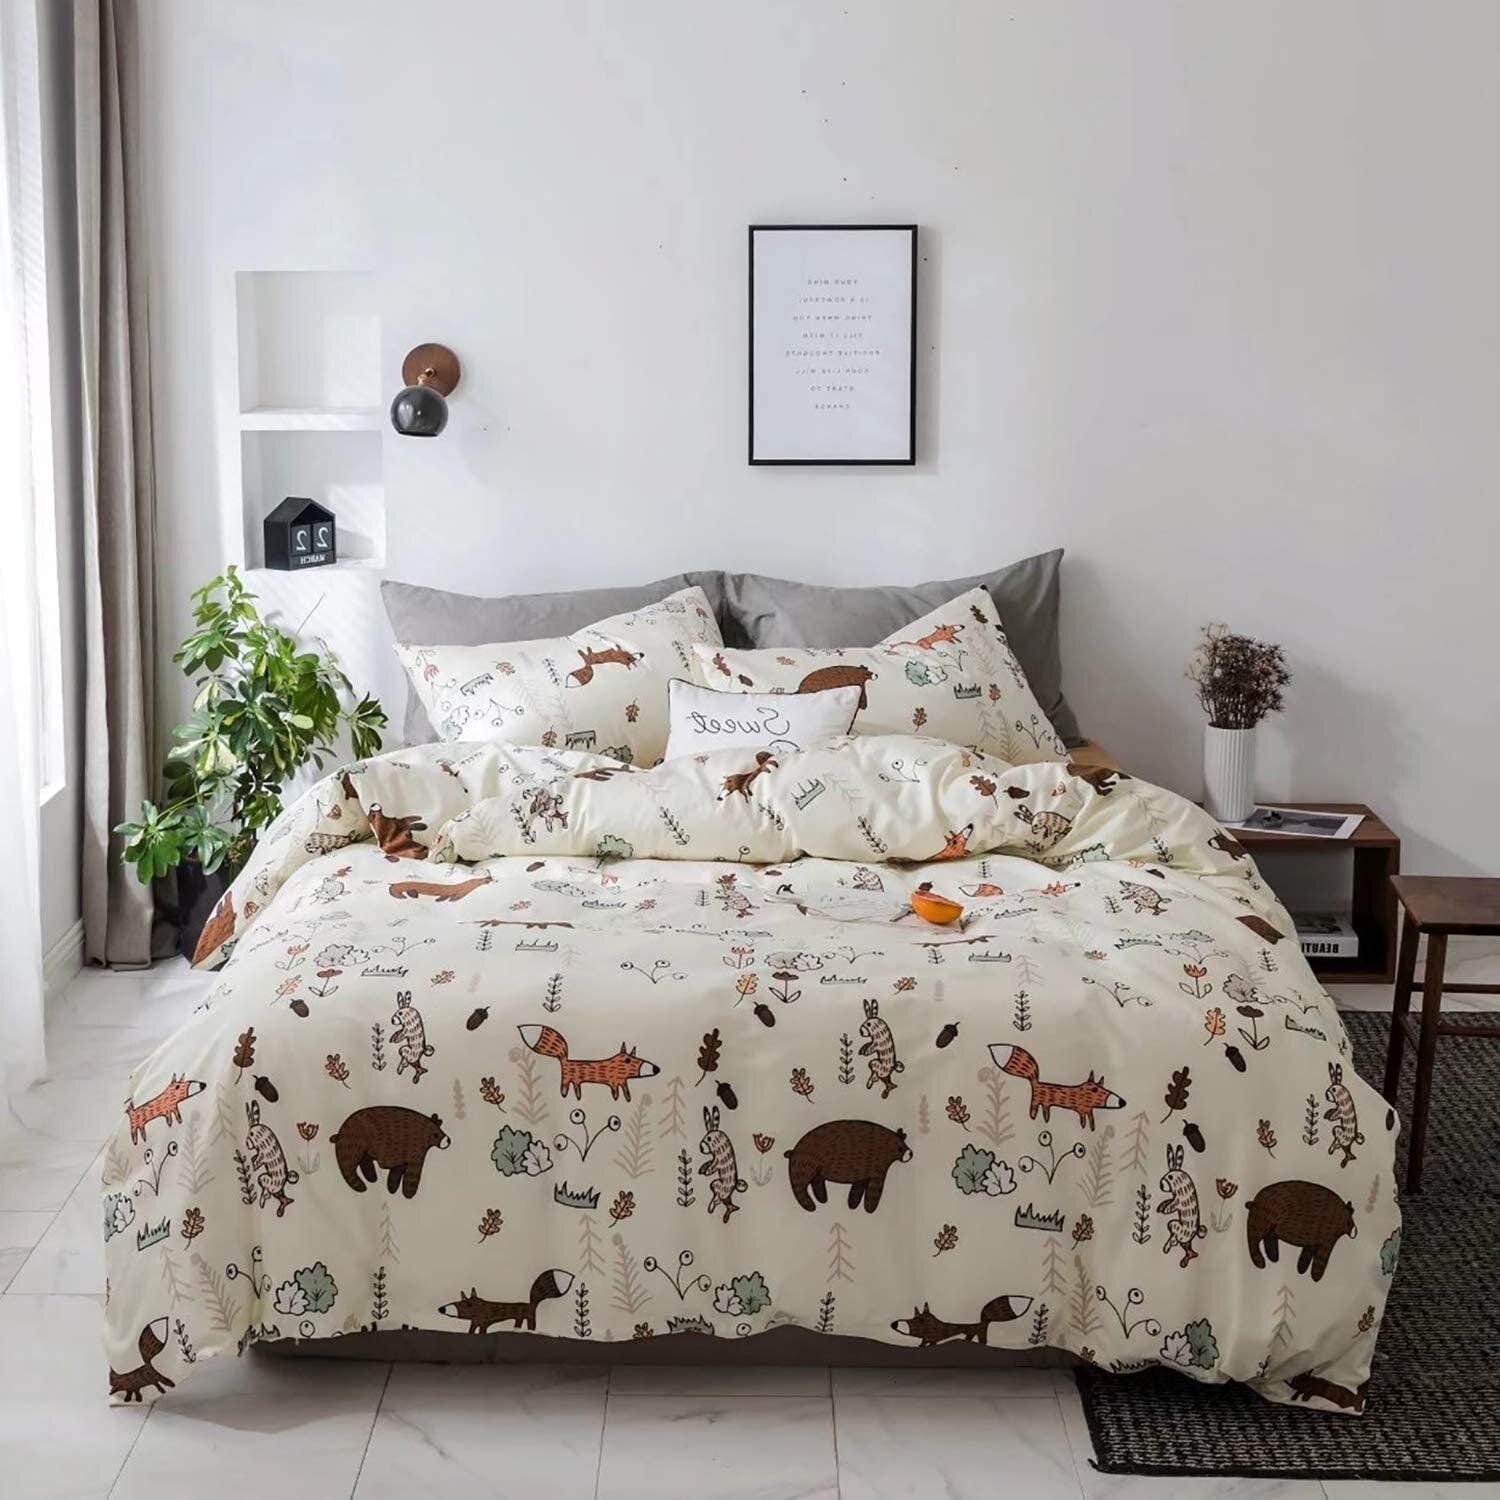 CLOTHKNOW Yellow Bear Duvet Cover Sets Queen Cotton Boys Bedding Set Full Fox Woodland Rabbit Theme Pattern Cartoon Animal Bedding Duvet Cover 3Pcs Bedding Set with Zipper Closure for Child Bed 